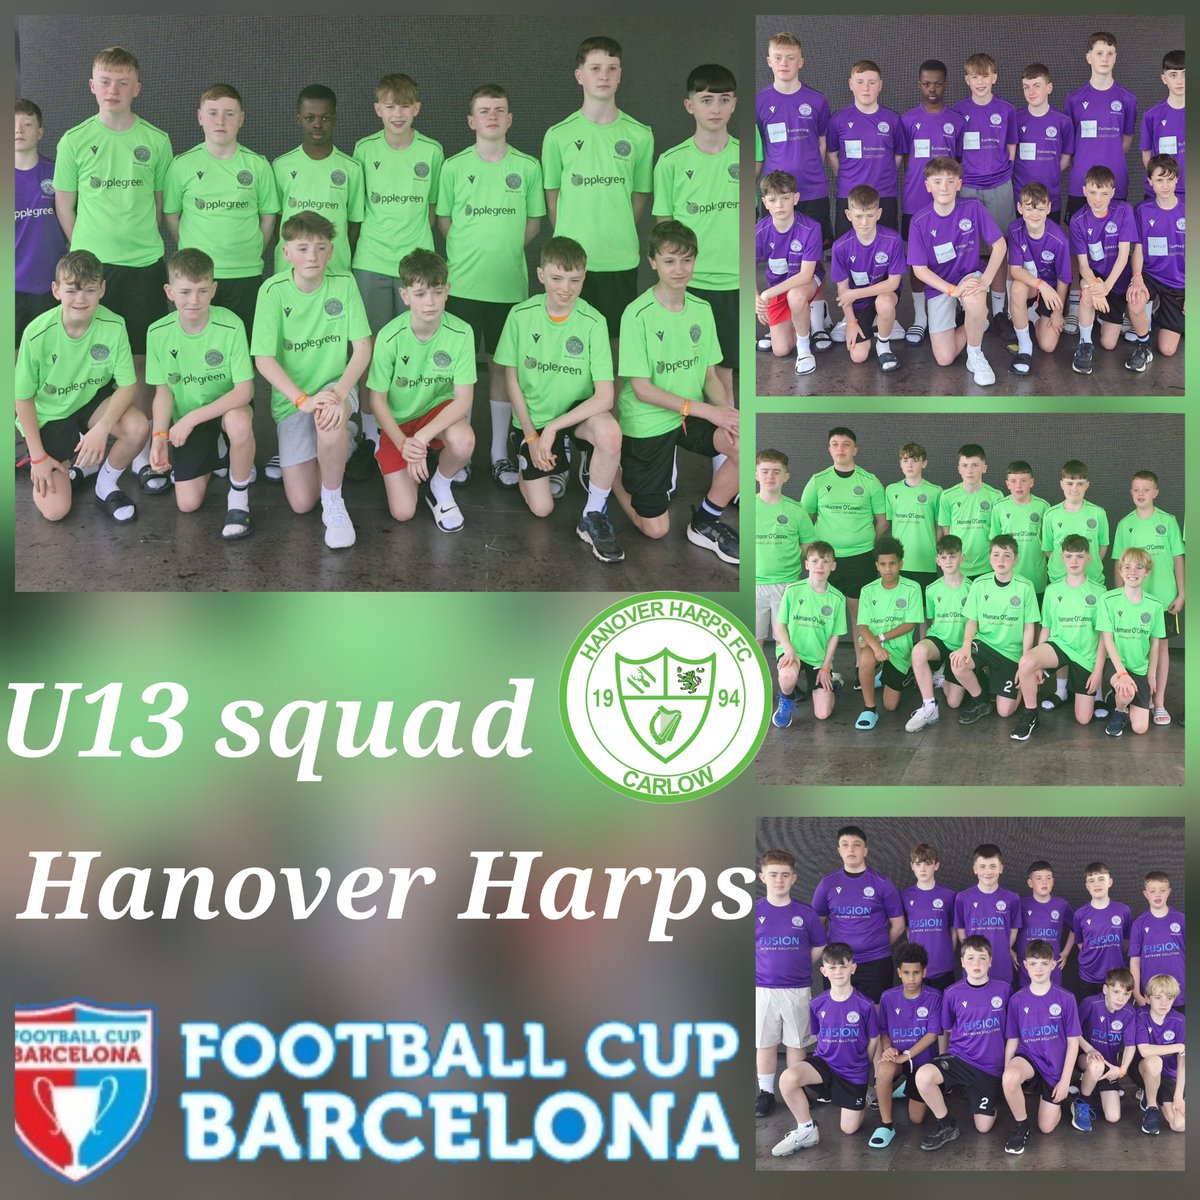 Our u13 squad have touched down in Barcelona to join the u15s in what will be a unforgettable experience for them. Enjoy every moment boys. @FAICarlow @goapplegreen @nuamanufacture @Natsport @Pres_Carlow @cbscarlow @GCCCW1 @Carlow_Co_Co @Andreadaltonm @CarlowSoccer @EoghainUi